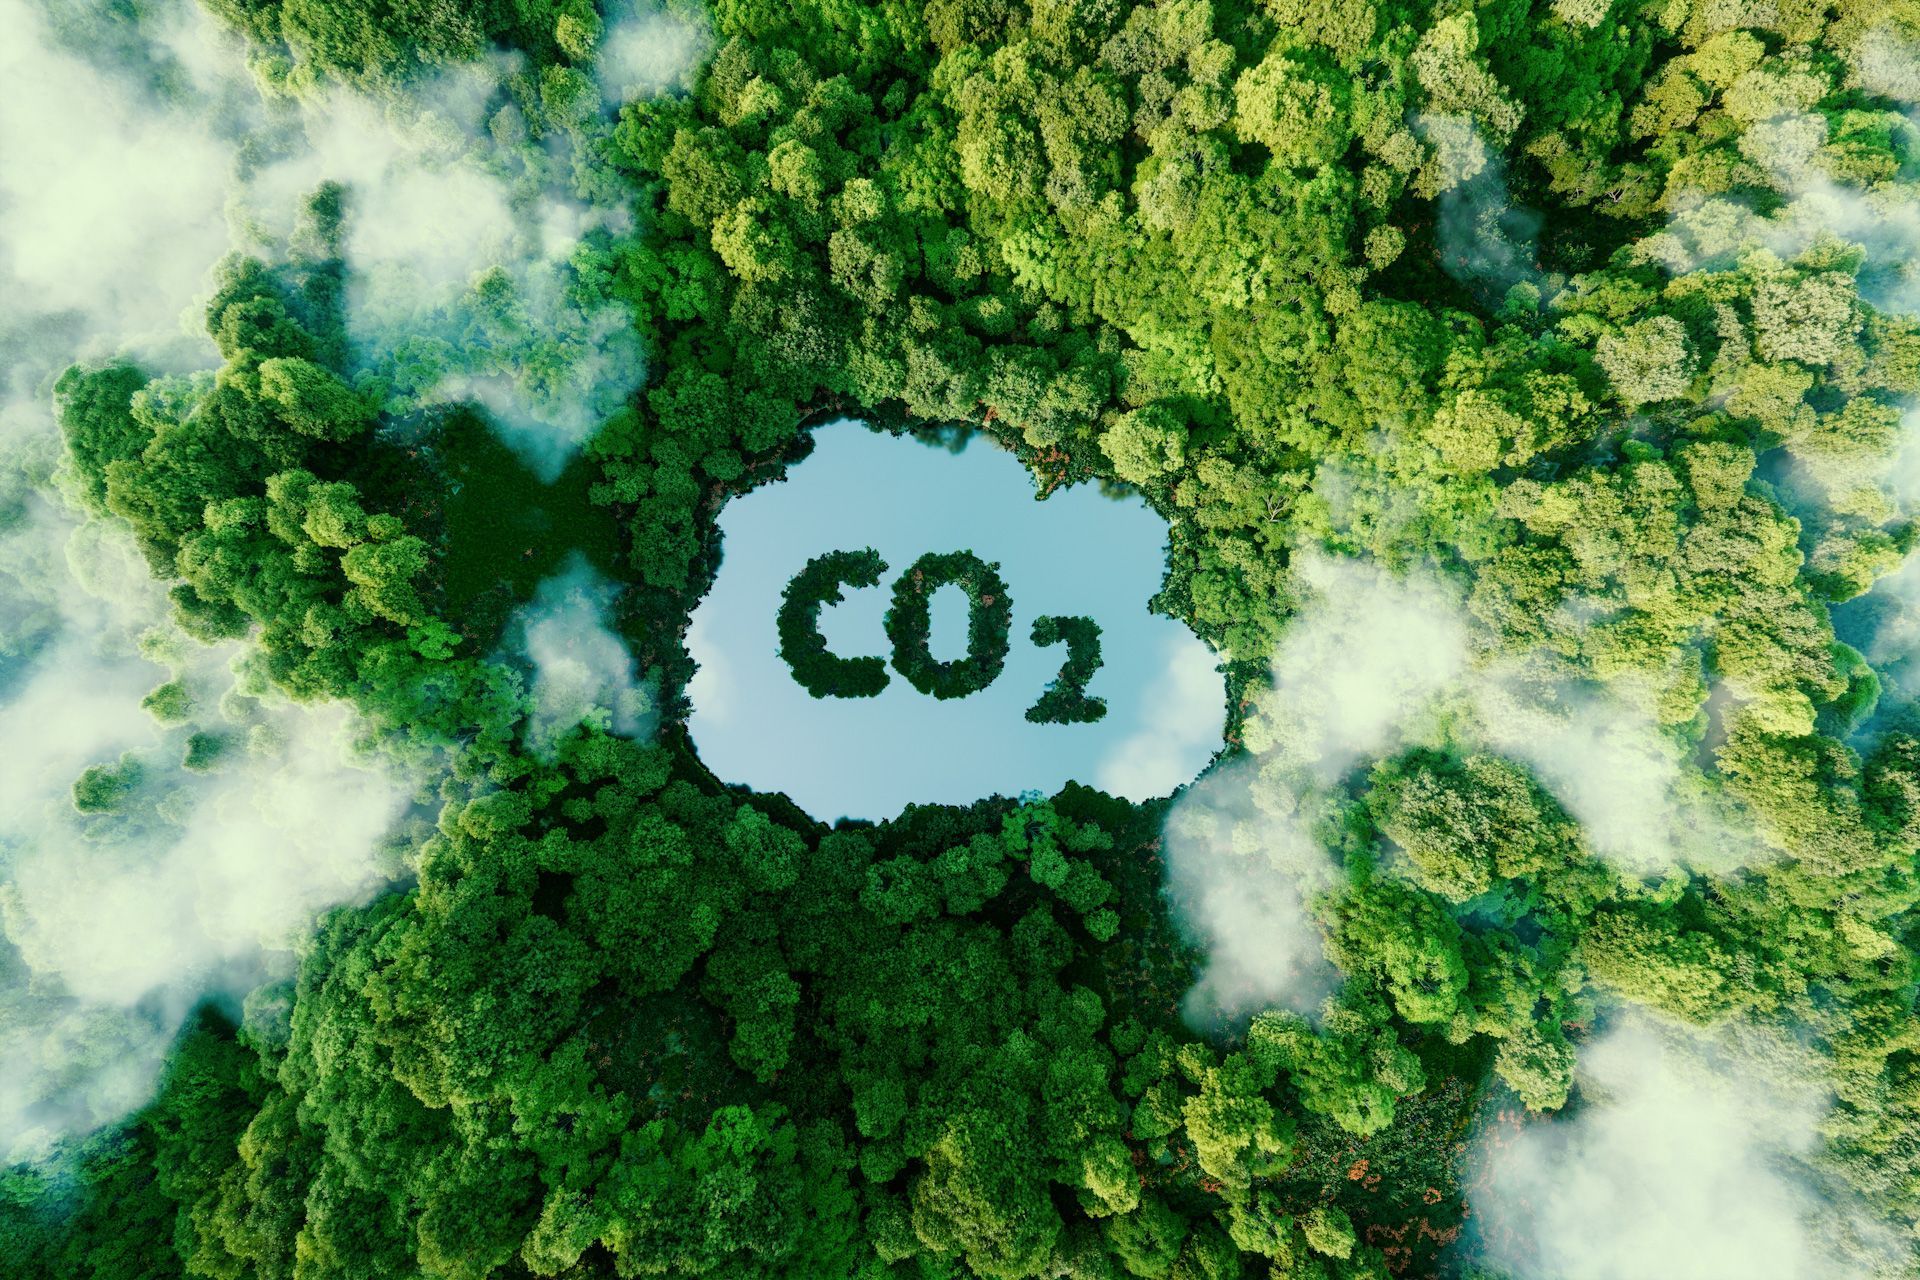 An aerial view of a forest with a cloud made of co2